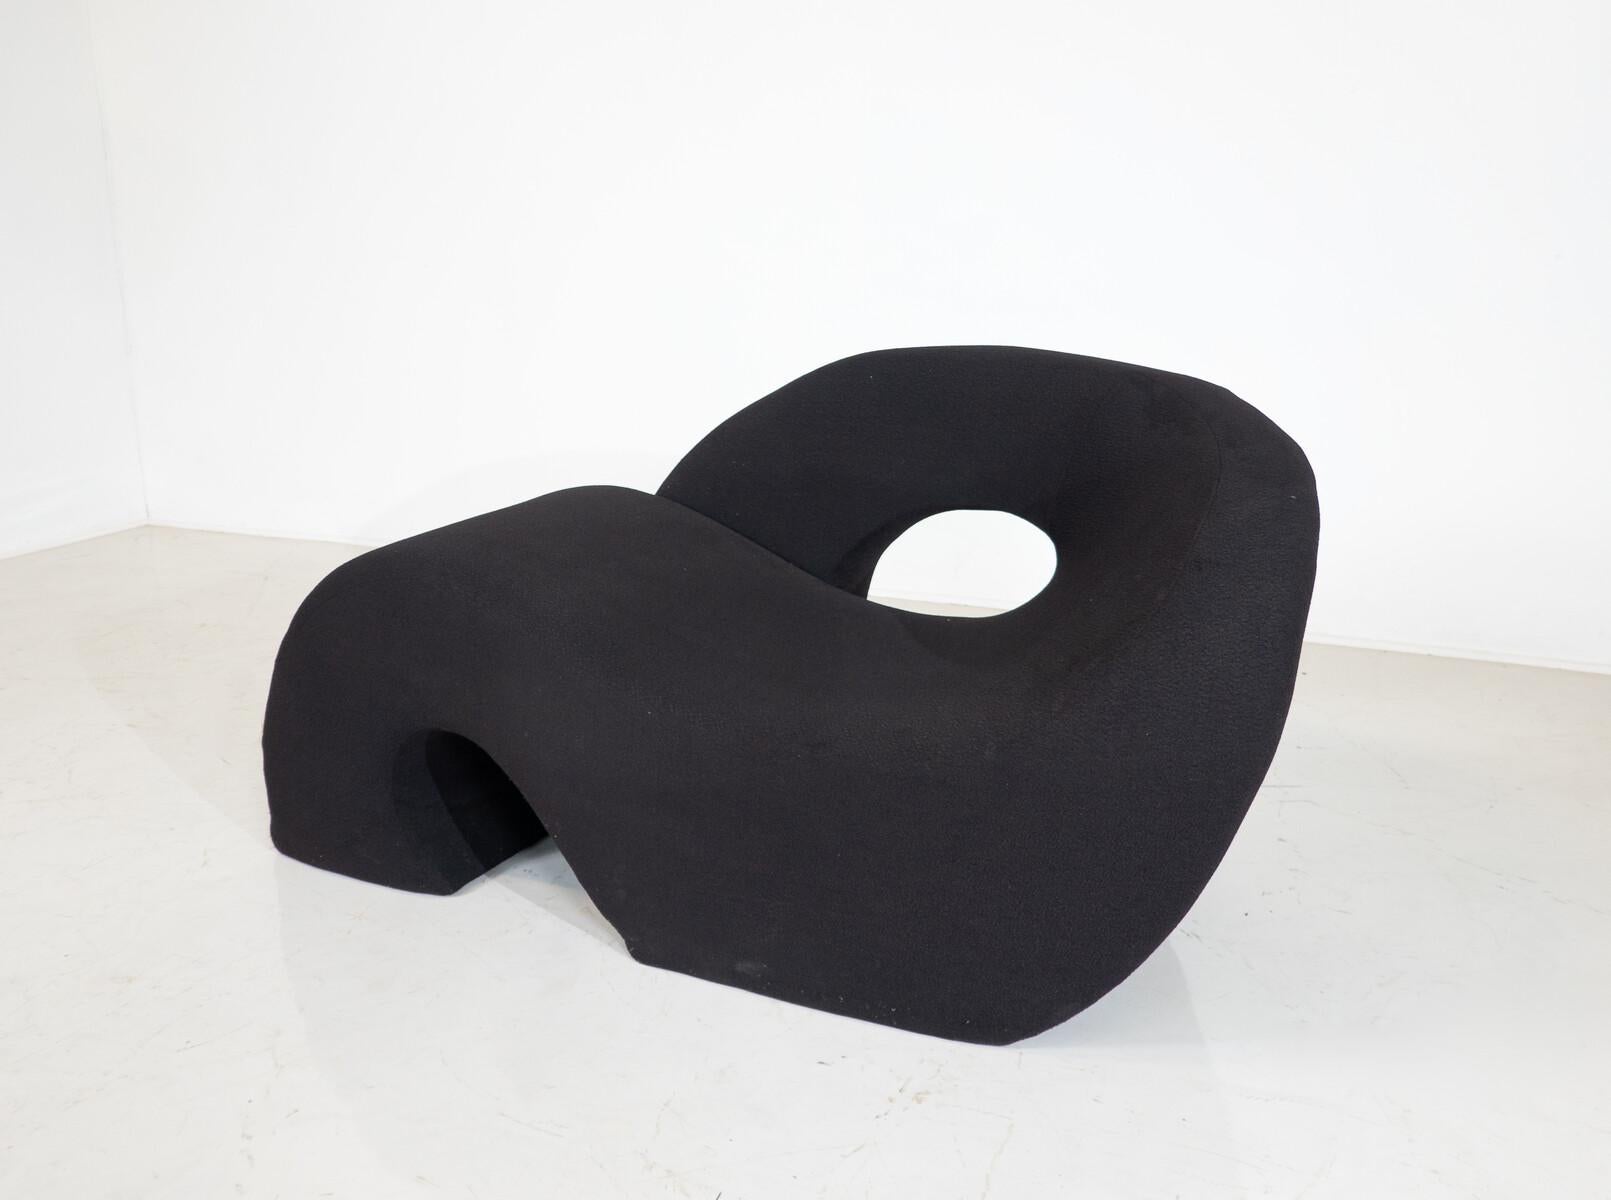 Sculptural Sess Lounge Chair by Nani Prina for Sormani, 1968 In Good Condition For Sale In Brussels, BE